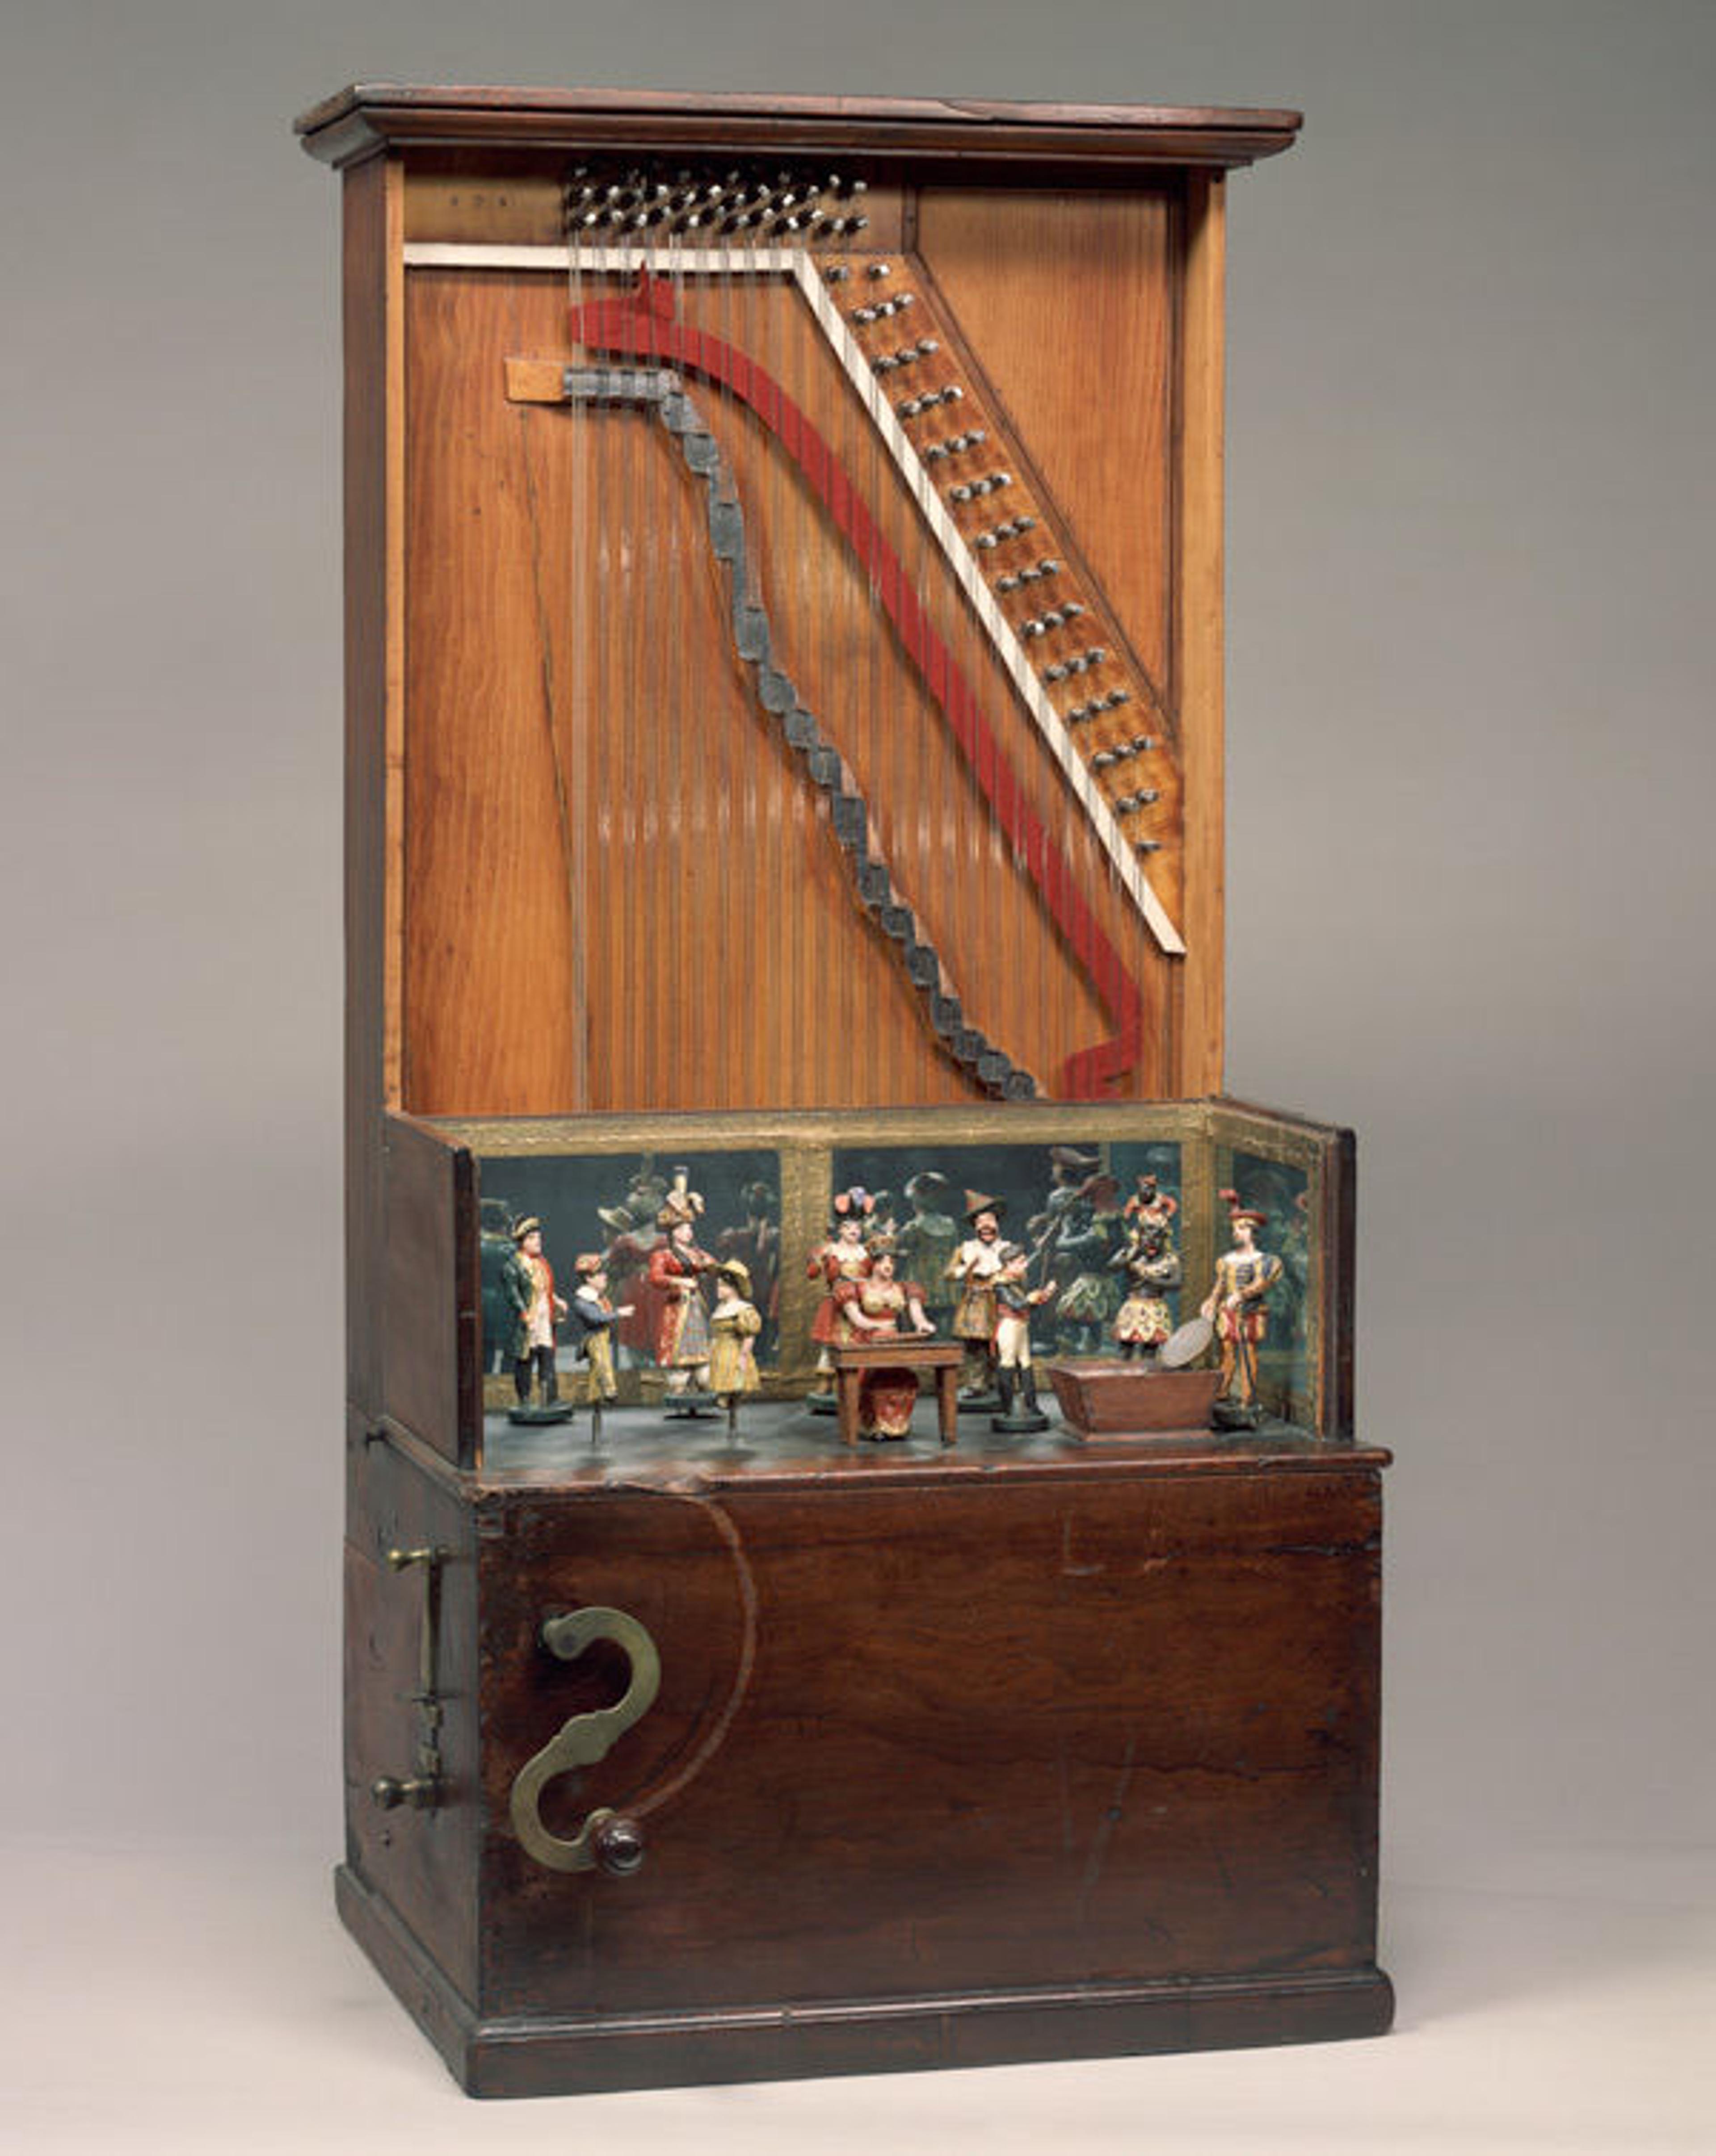 George Hicks (British, 1818–1863). Barrel piano, ca. 1860. Wood, various materials. The Metropolitan Museum of Art, New York, The Crosby Brown Collection of Musical Instruments, 1889 (89.4.2048)